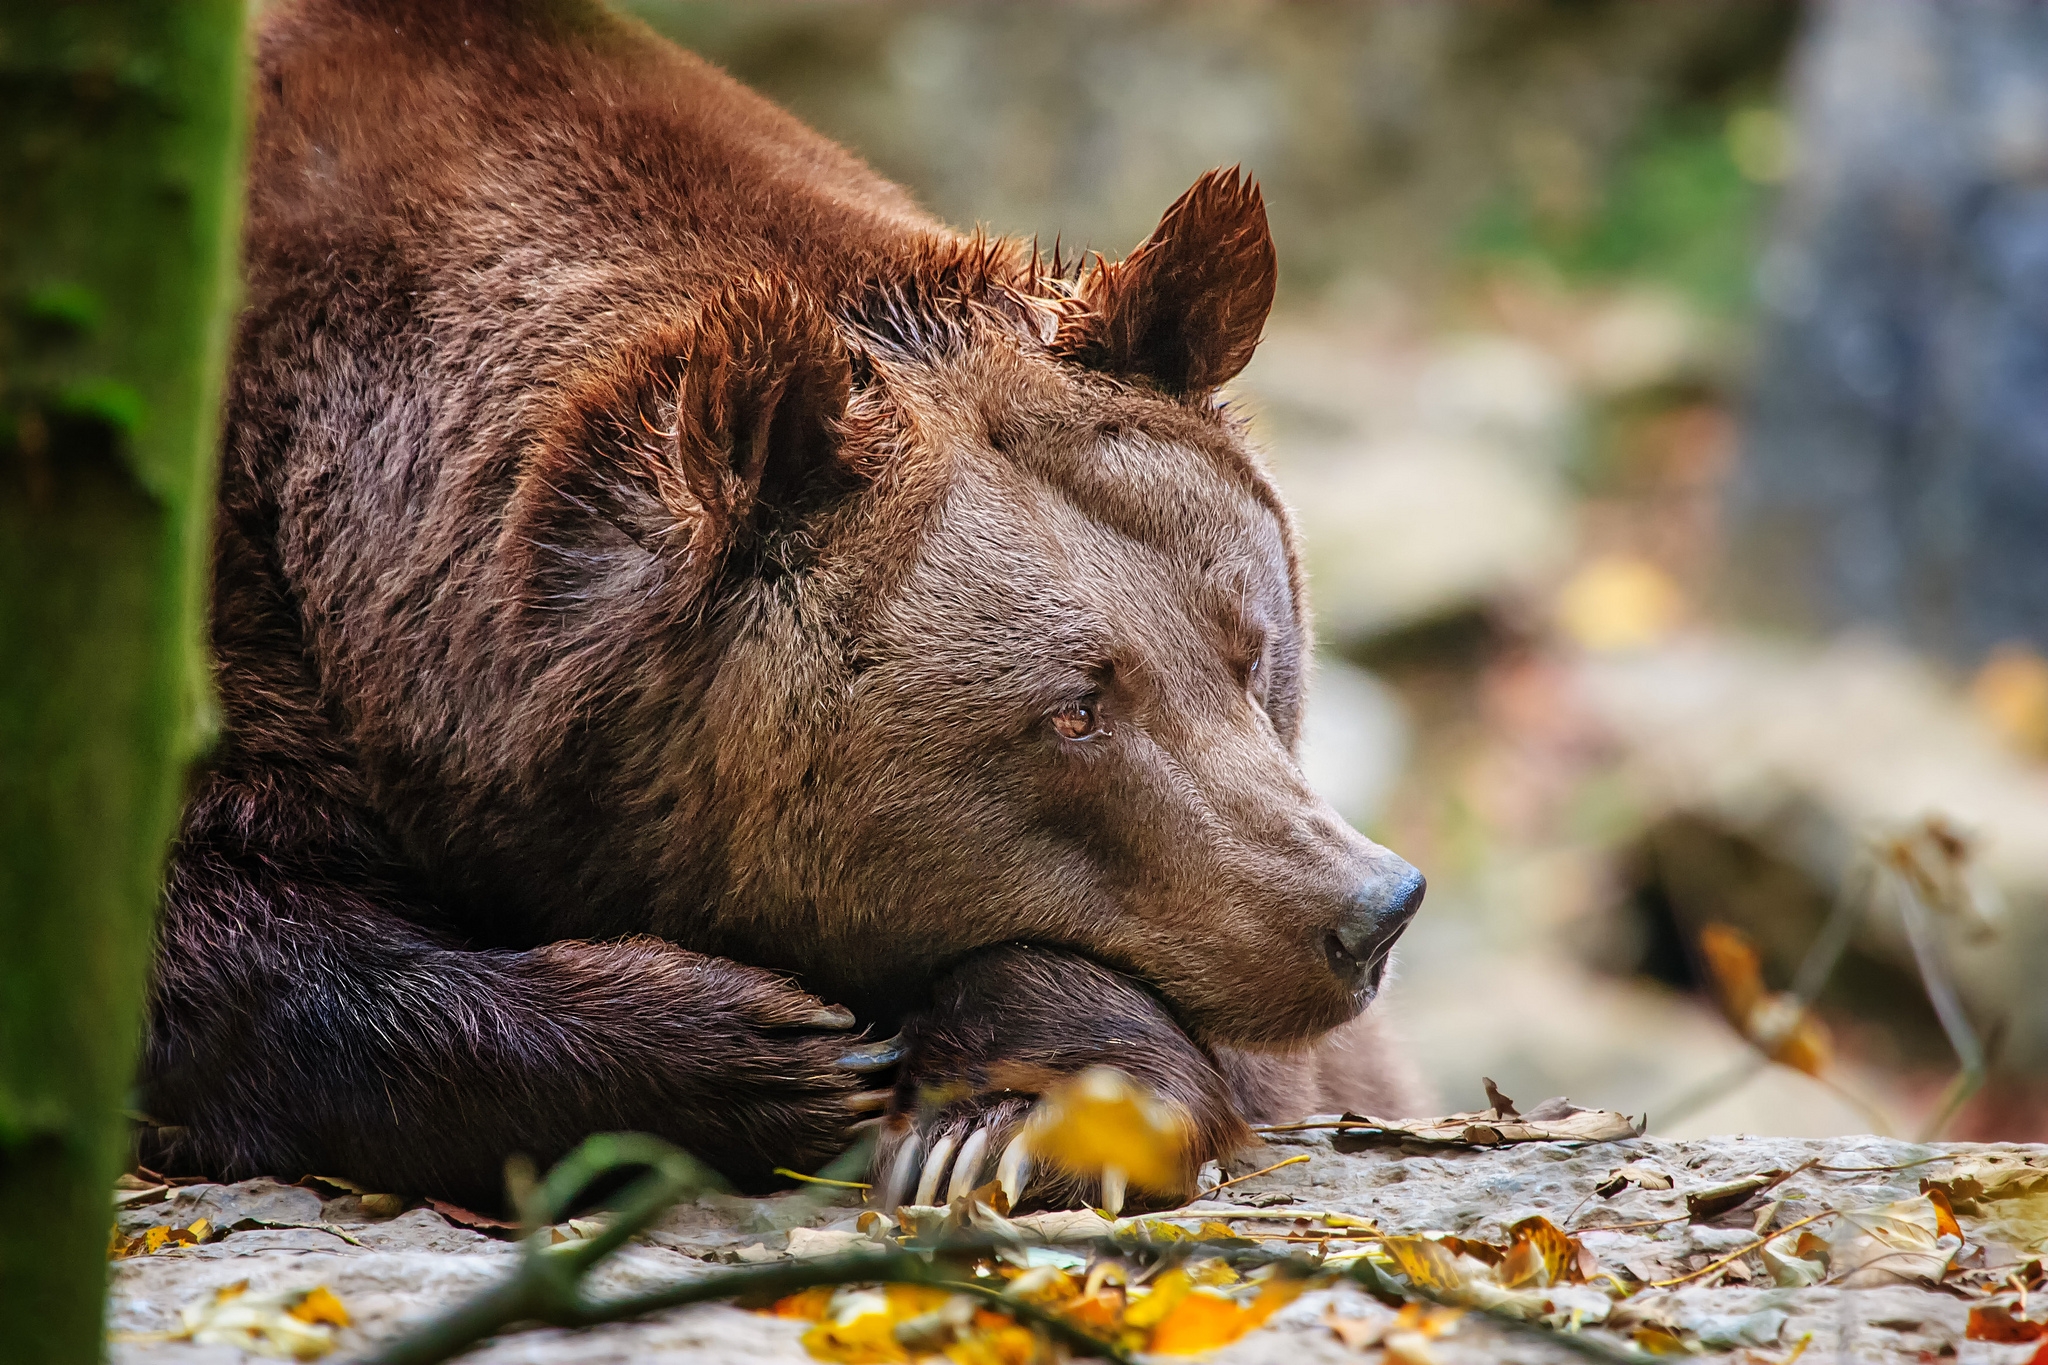 animals, to lie down, lie, muzzle, bear, relaxation, rest